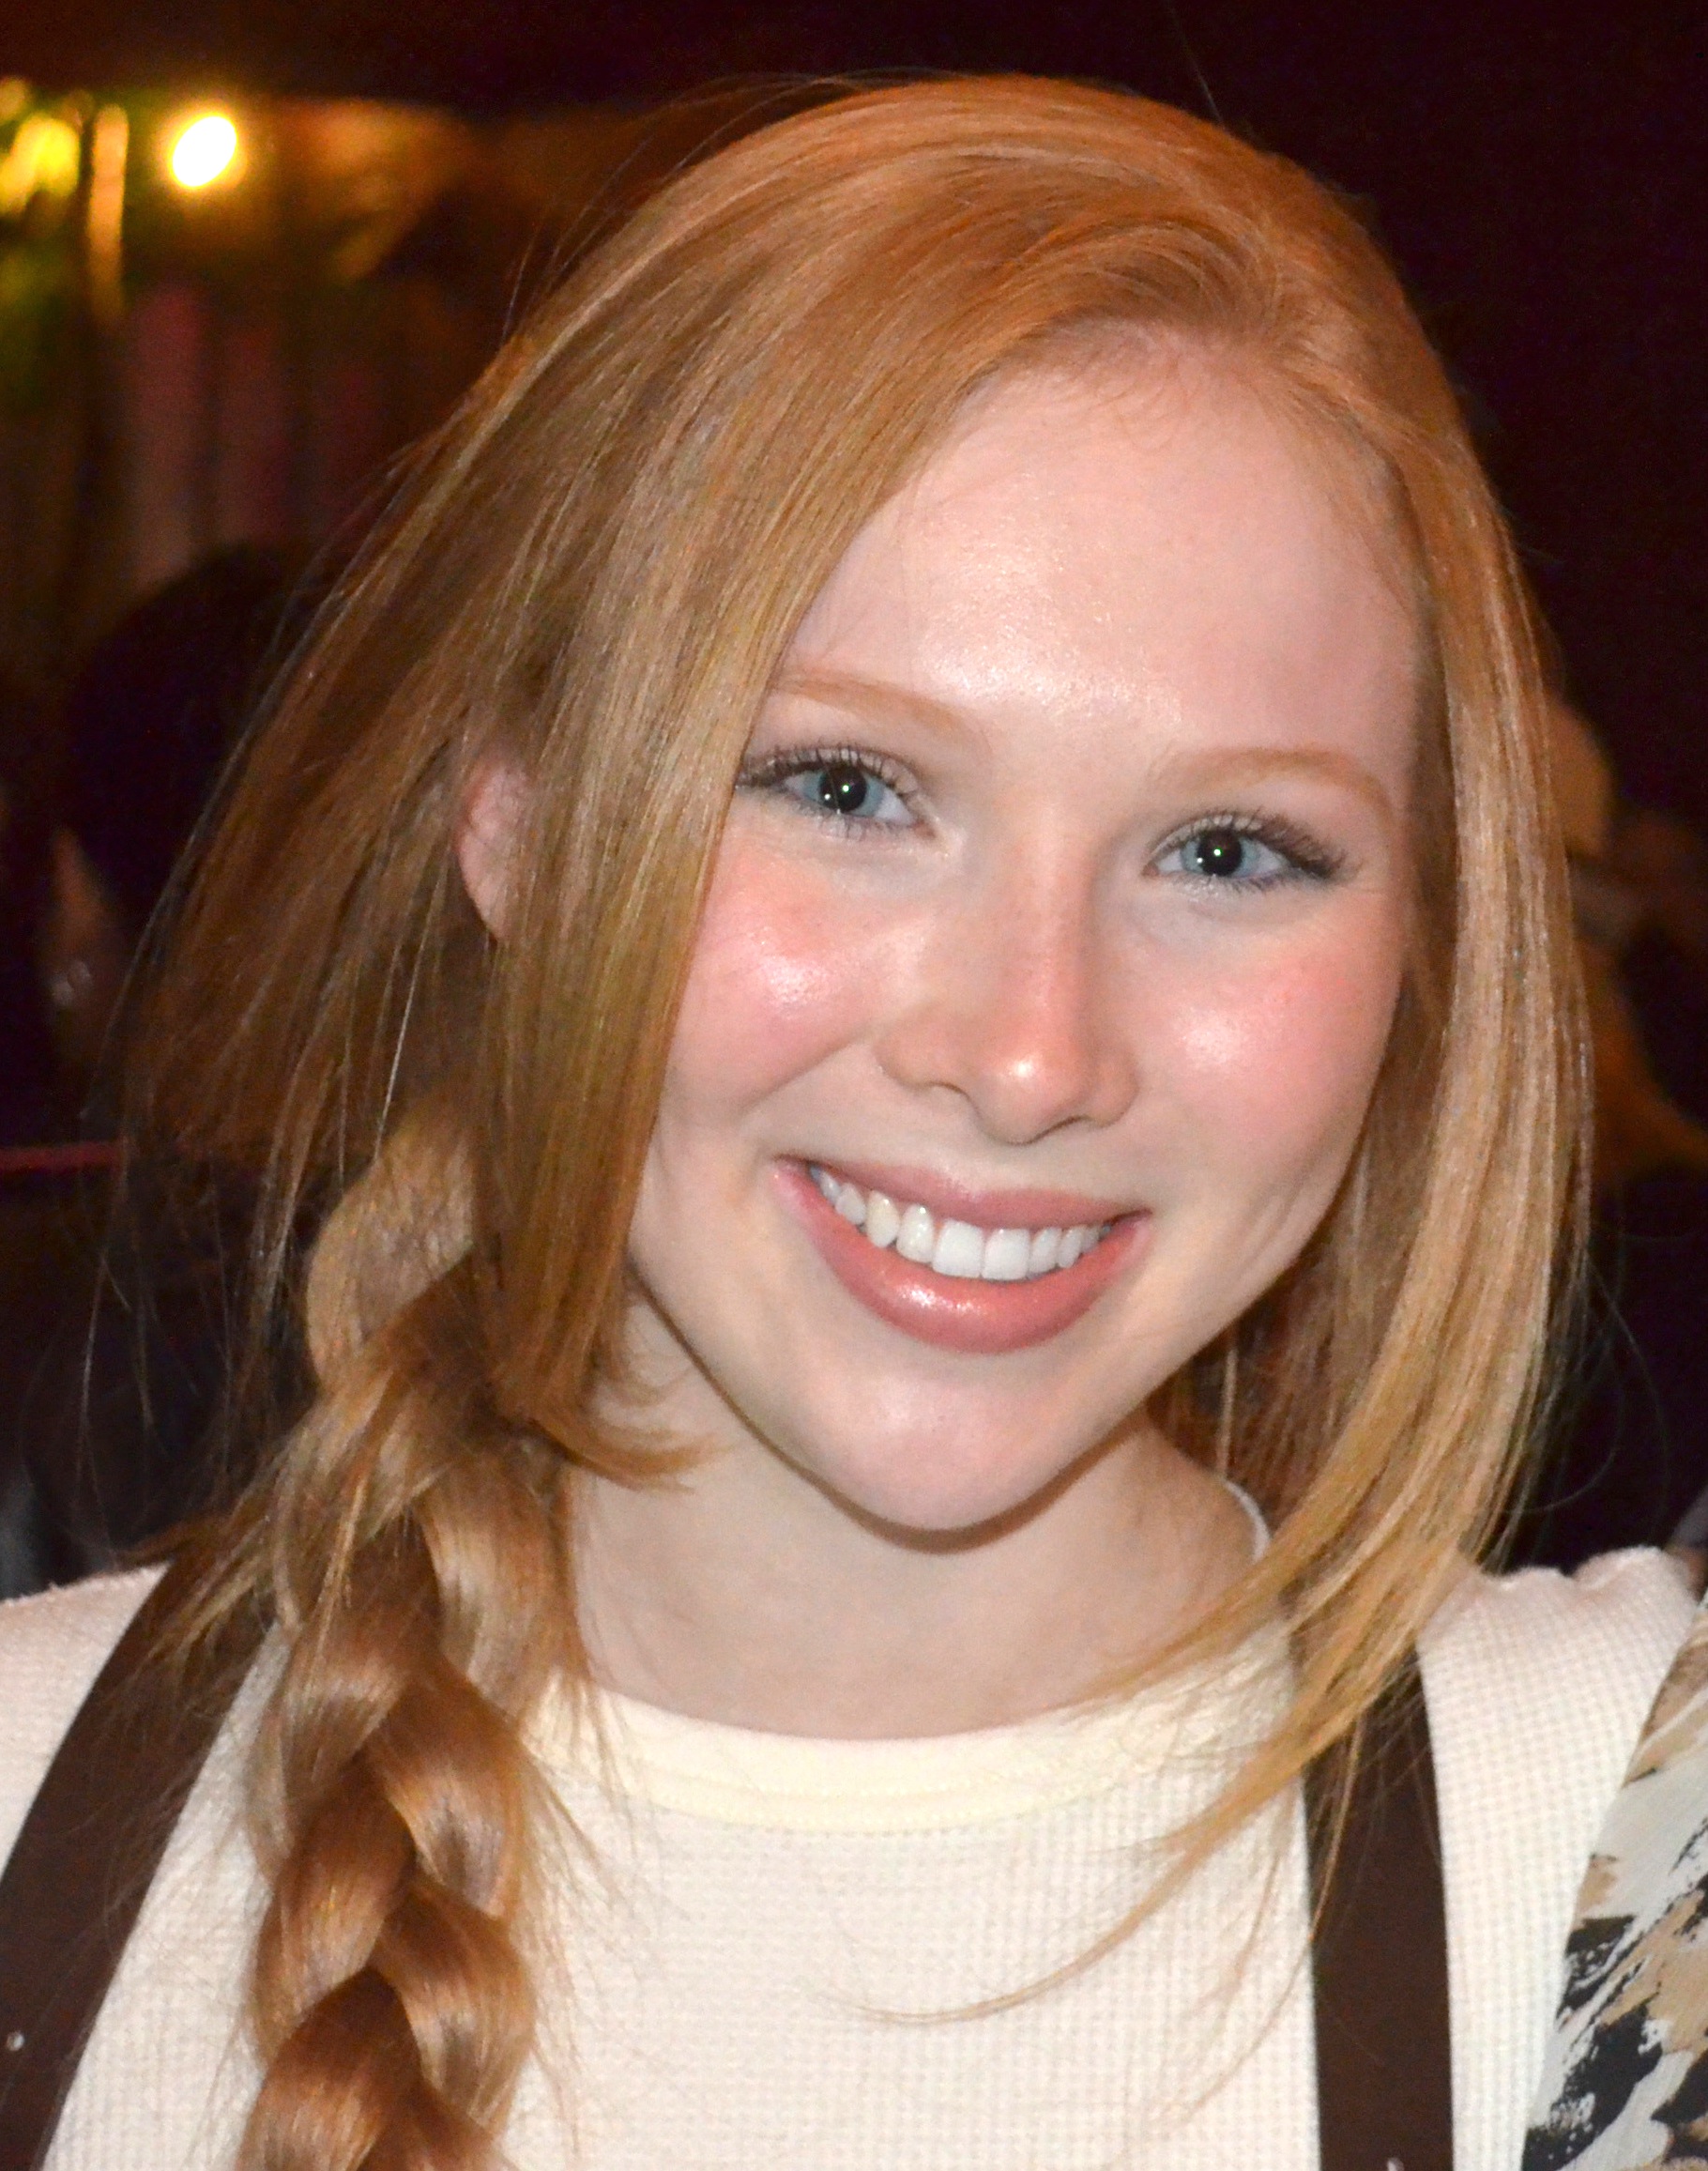 The 28-year old daughter of father Tom Quinn and mother Dianne Quinn Molly Quinn in 2022 photo. Molly Quinn earned a  million dollar salary - leaving the net worth at 3 million in 2022